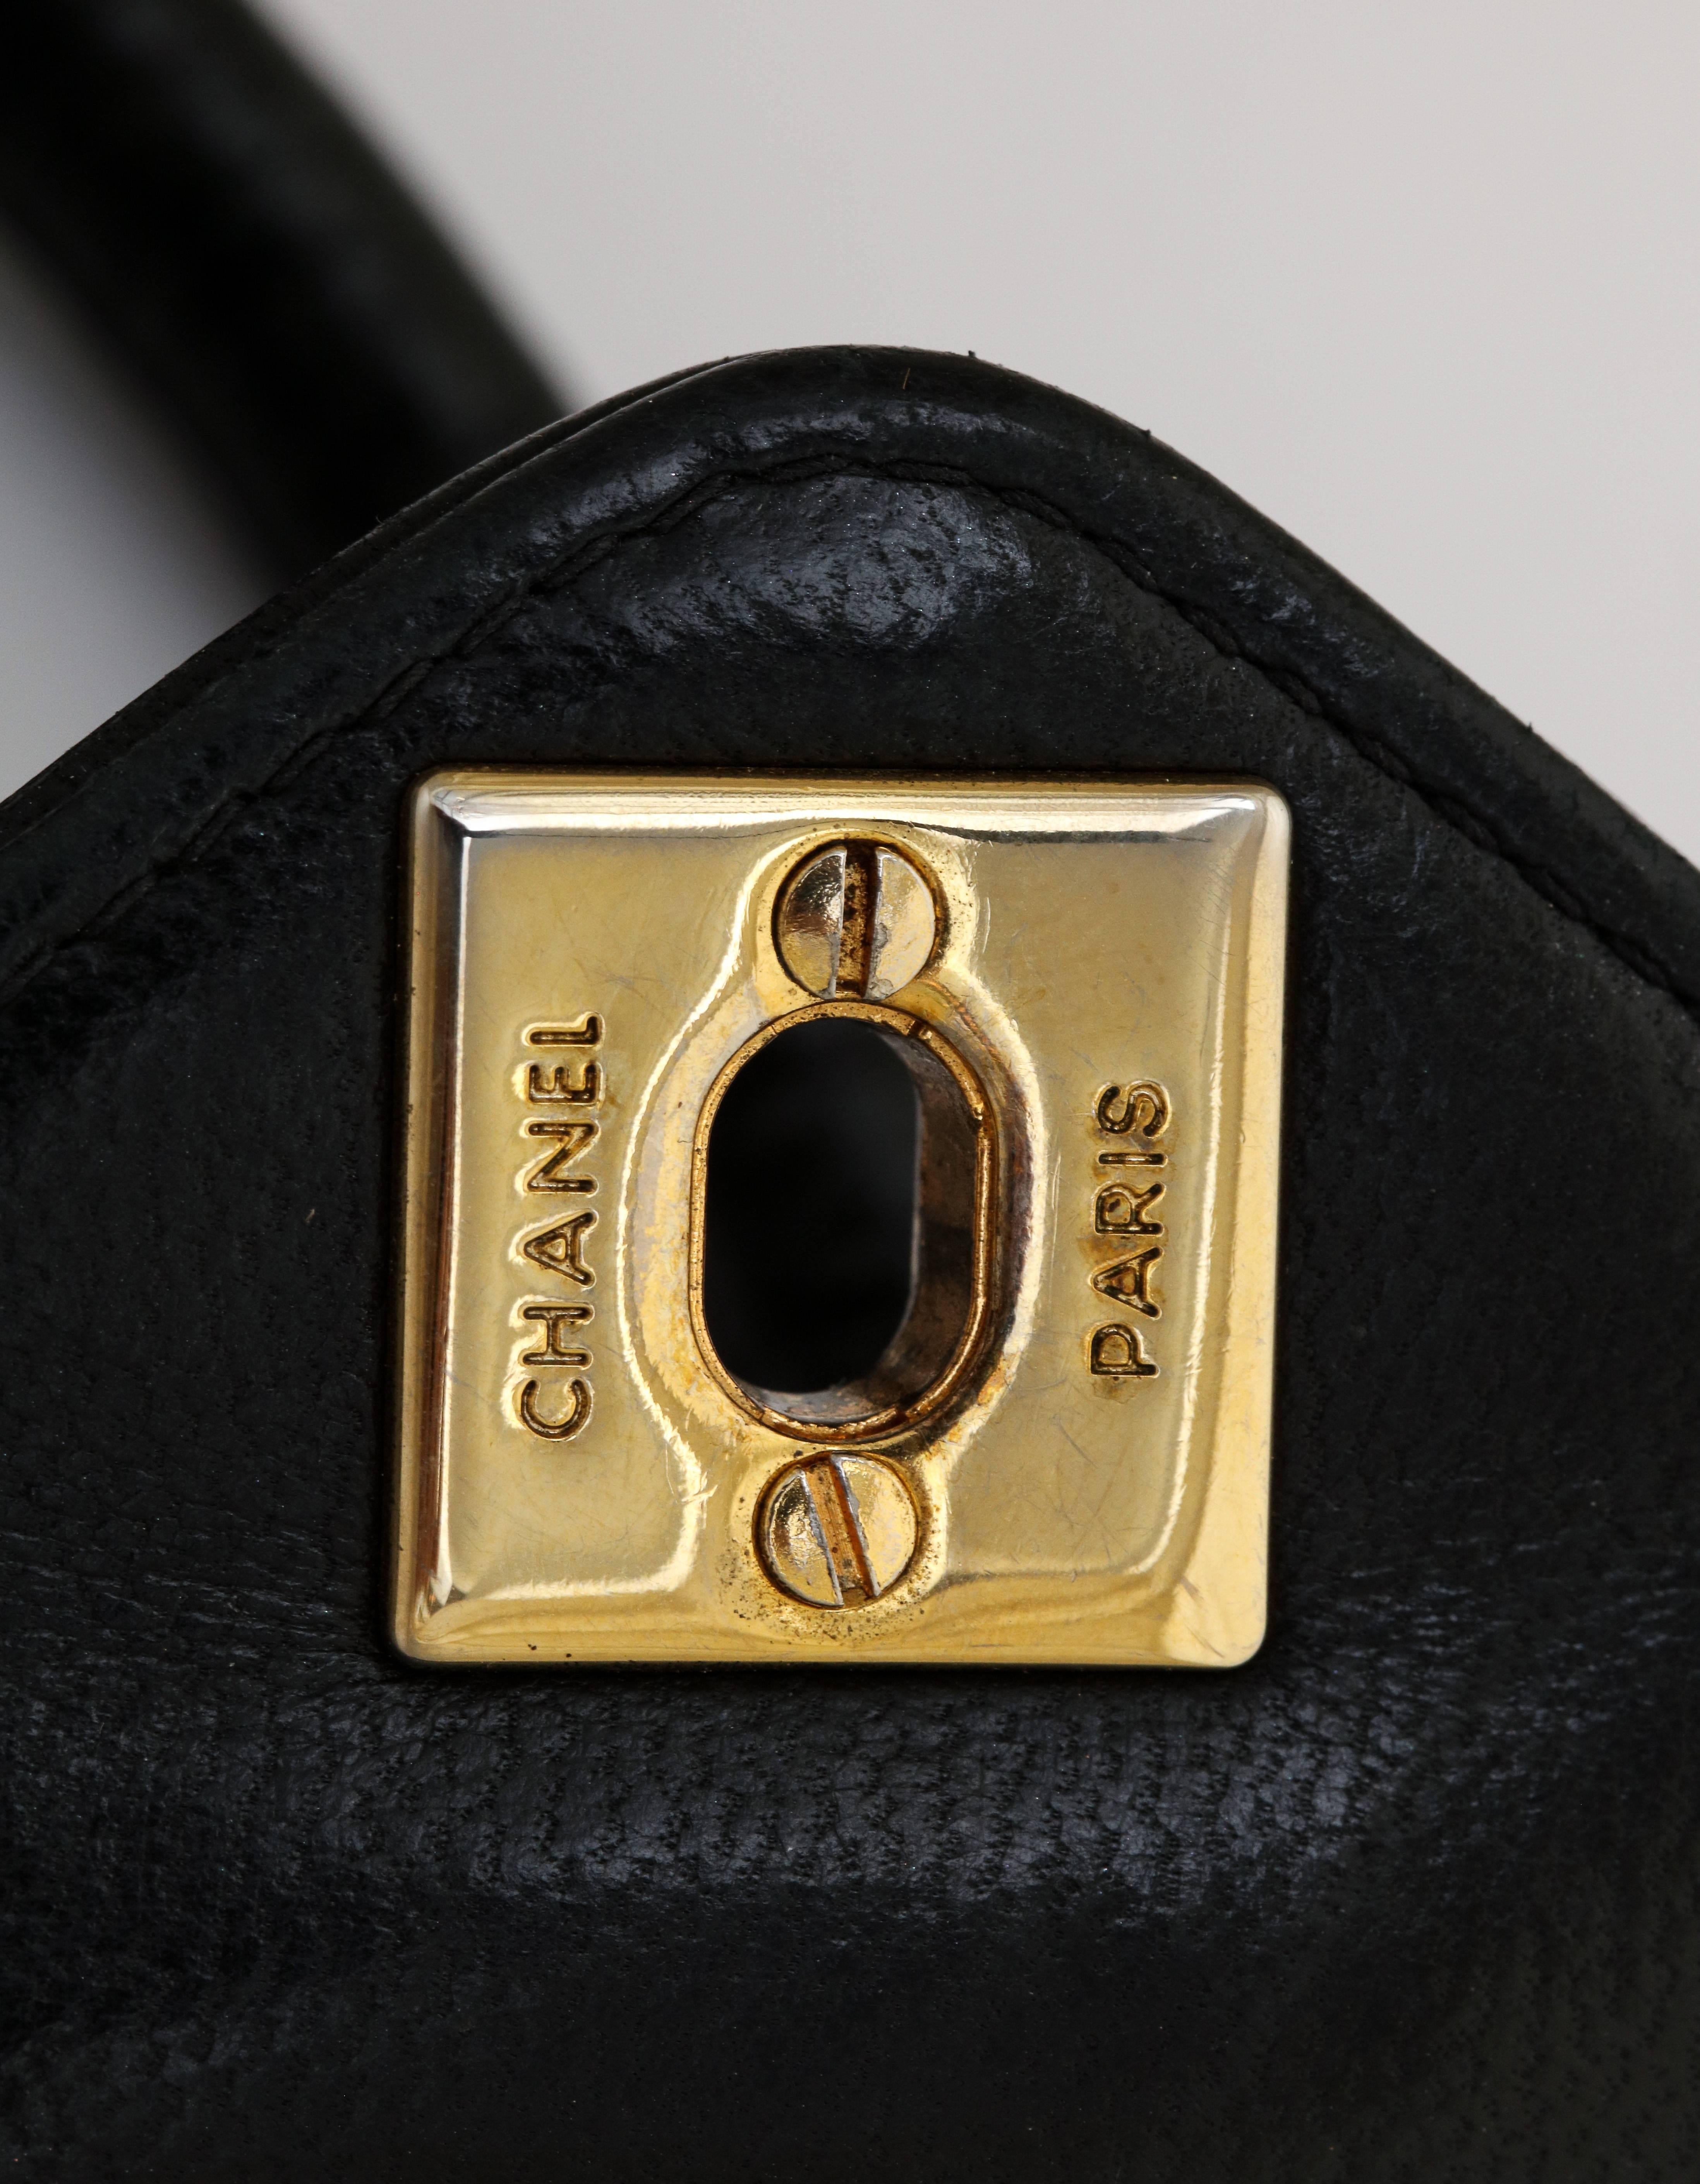 A fabulous black vintage Chanel bag with rolled leather strap 37.5